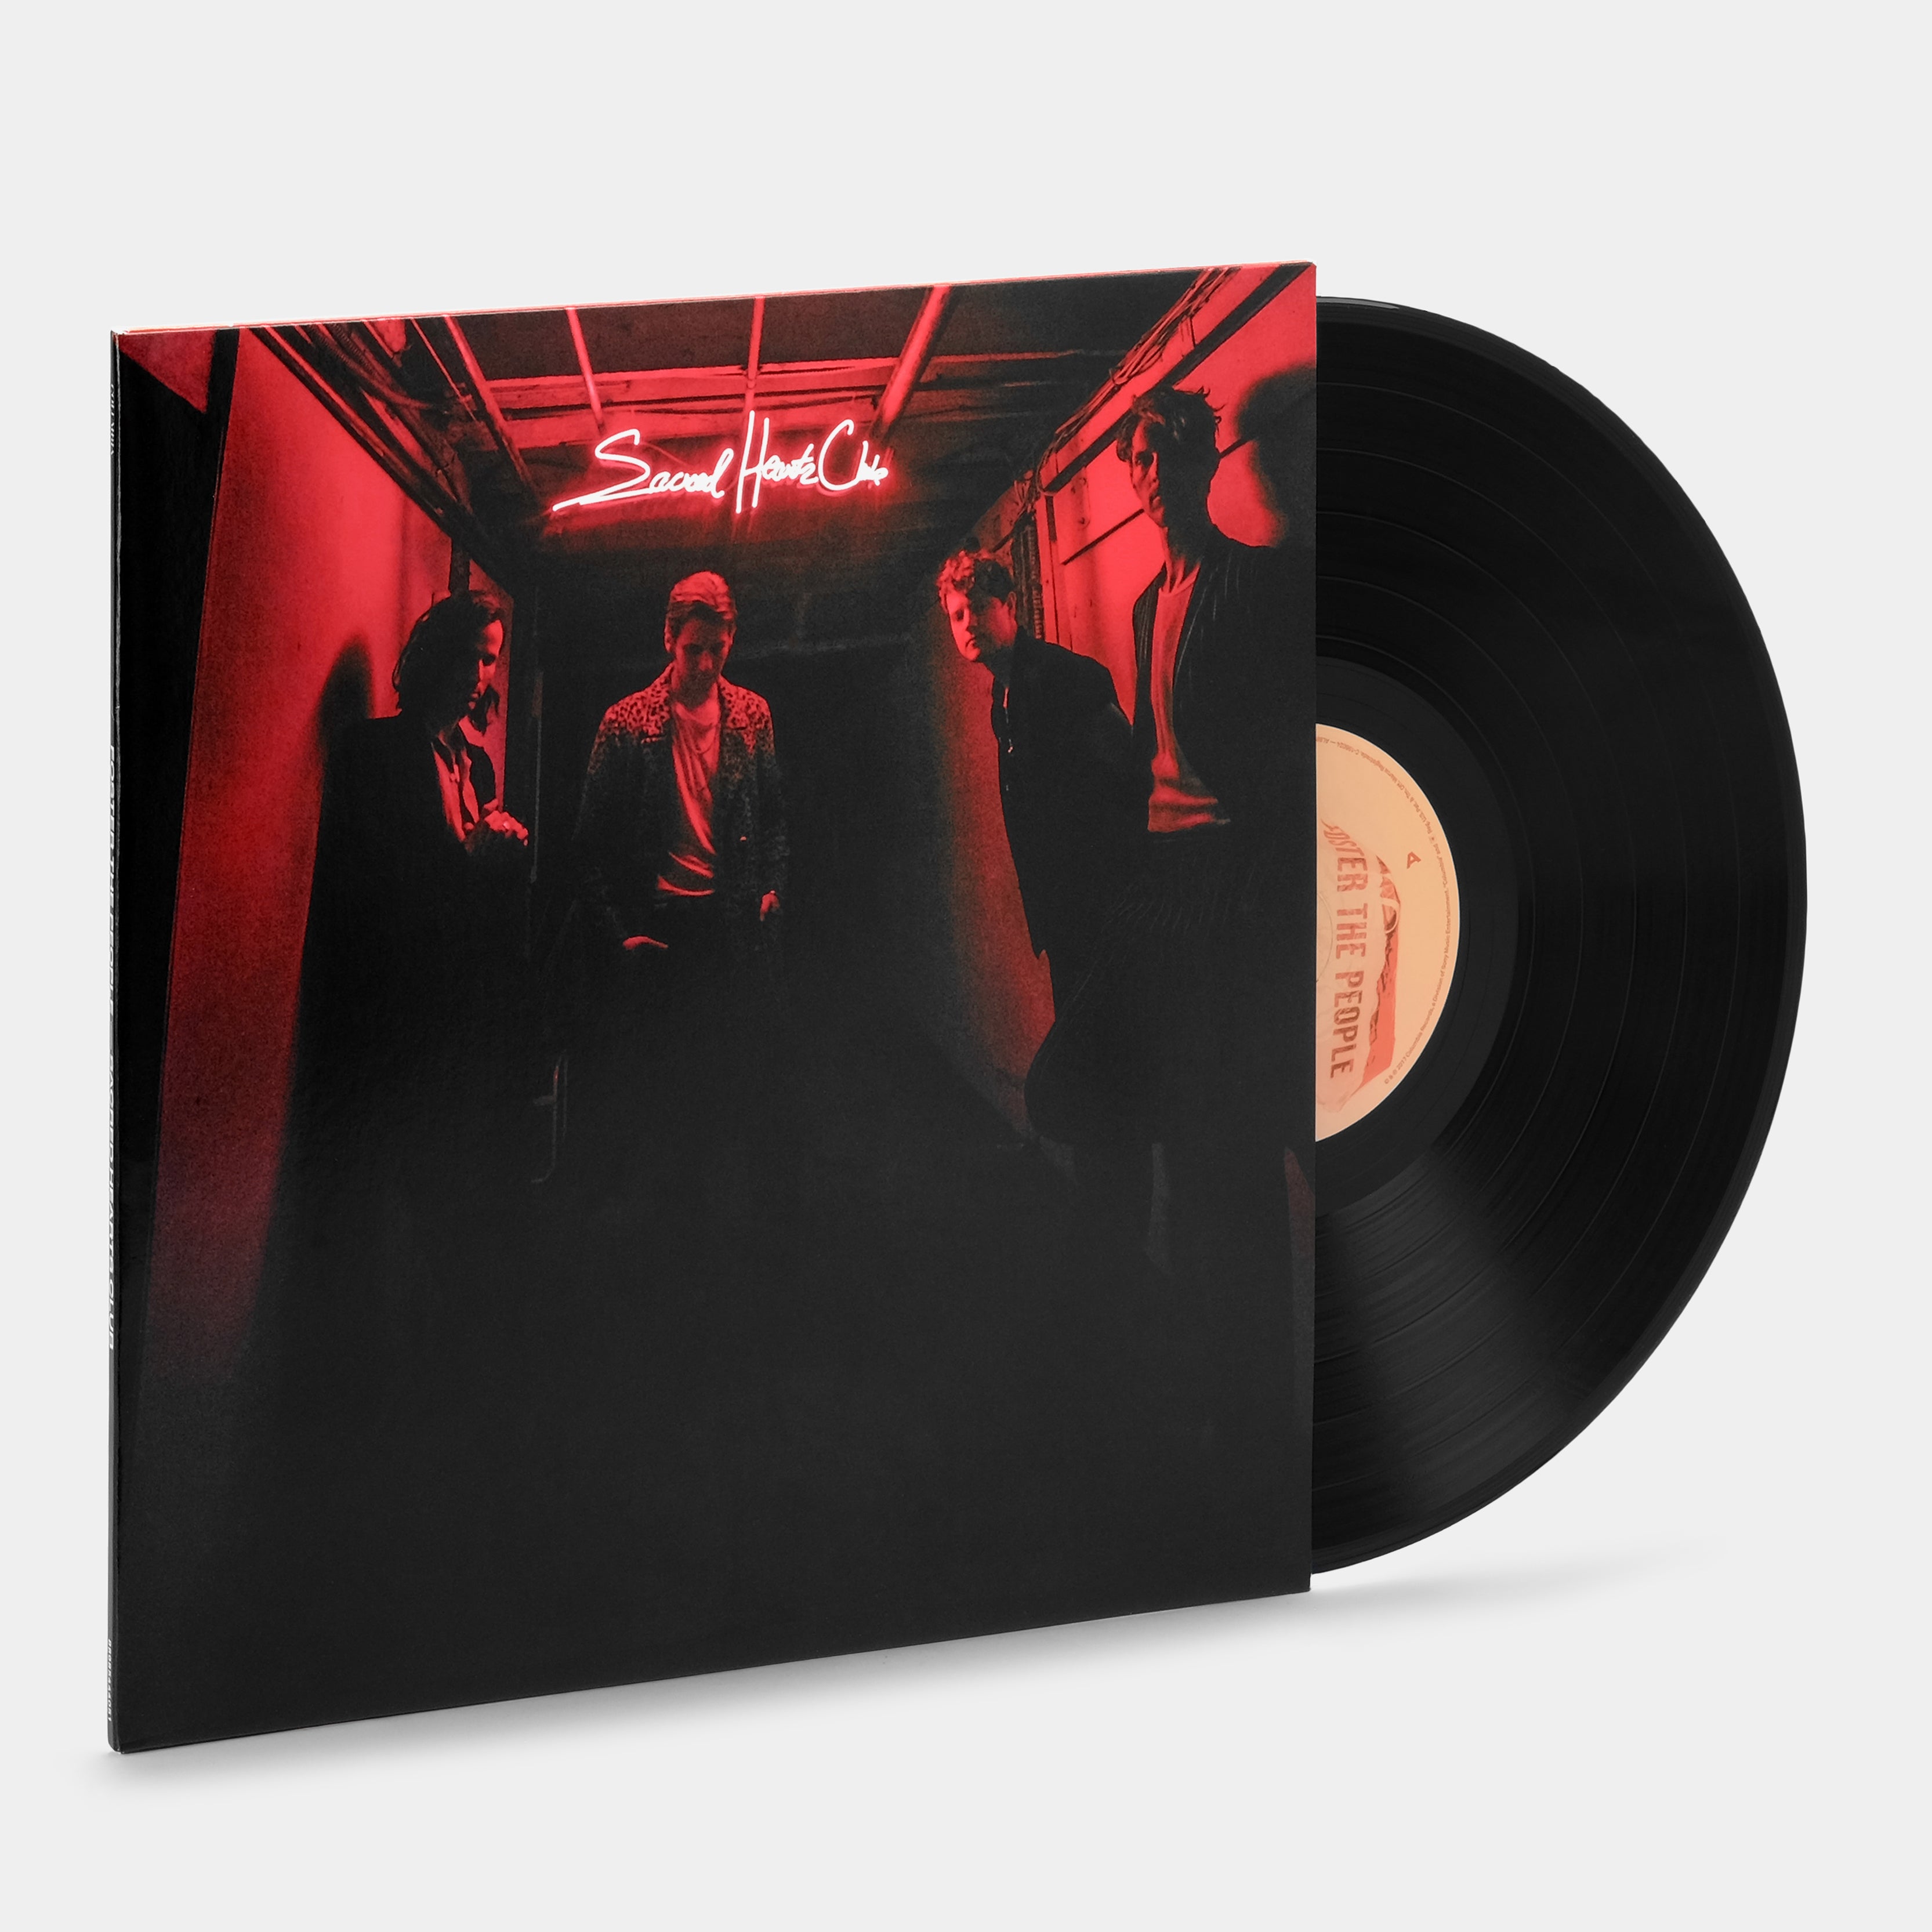 Foster The People - Sacred Hearts Club LP Vinyl Record